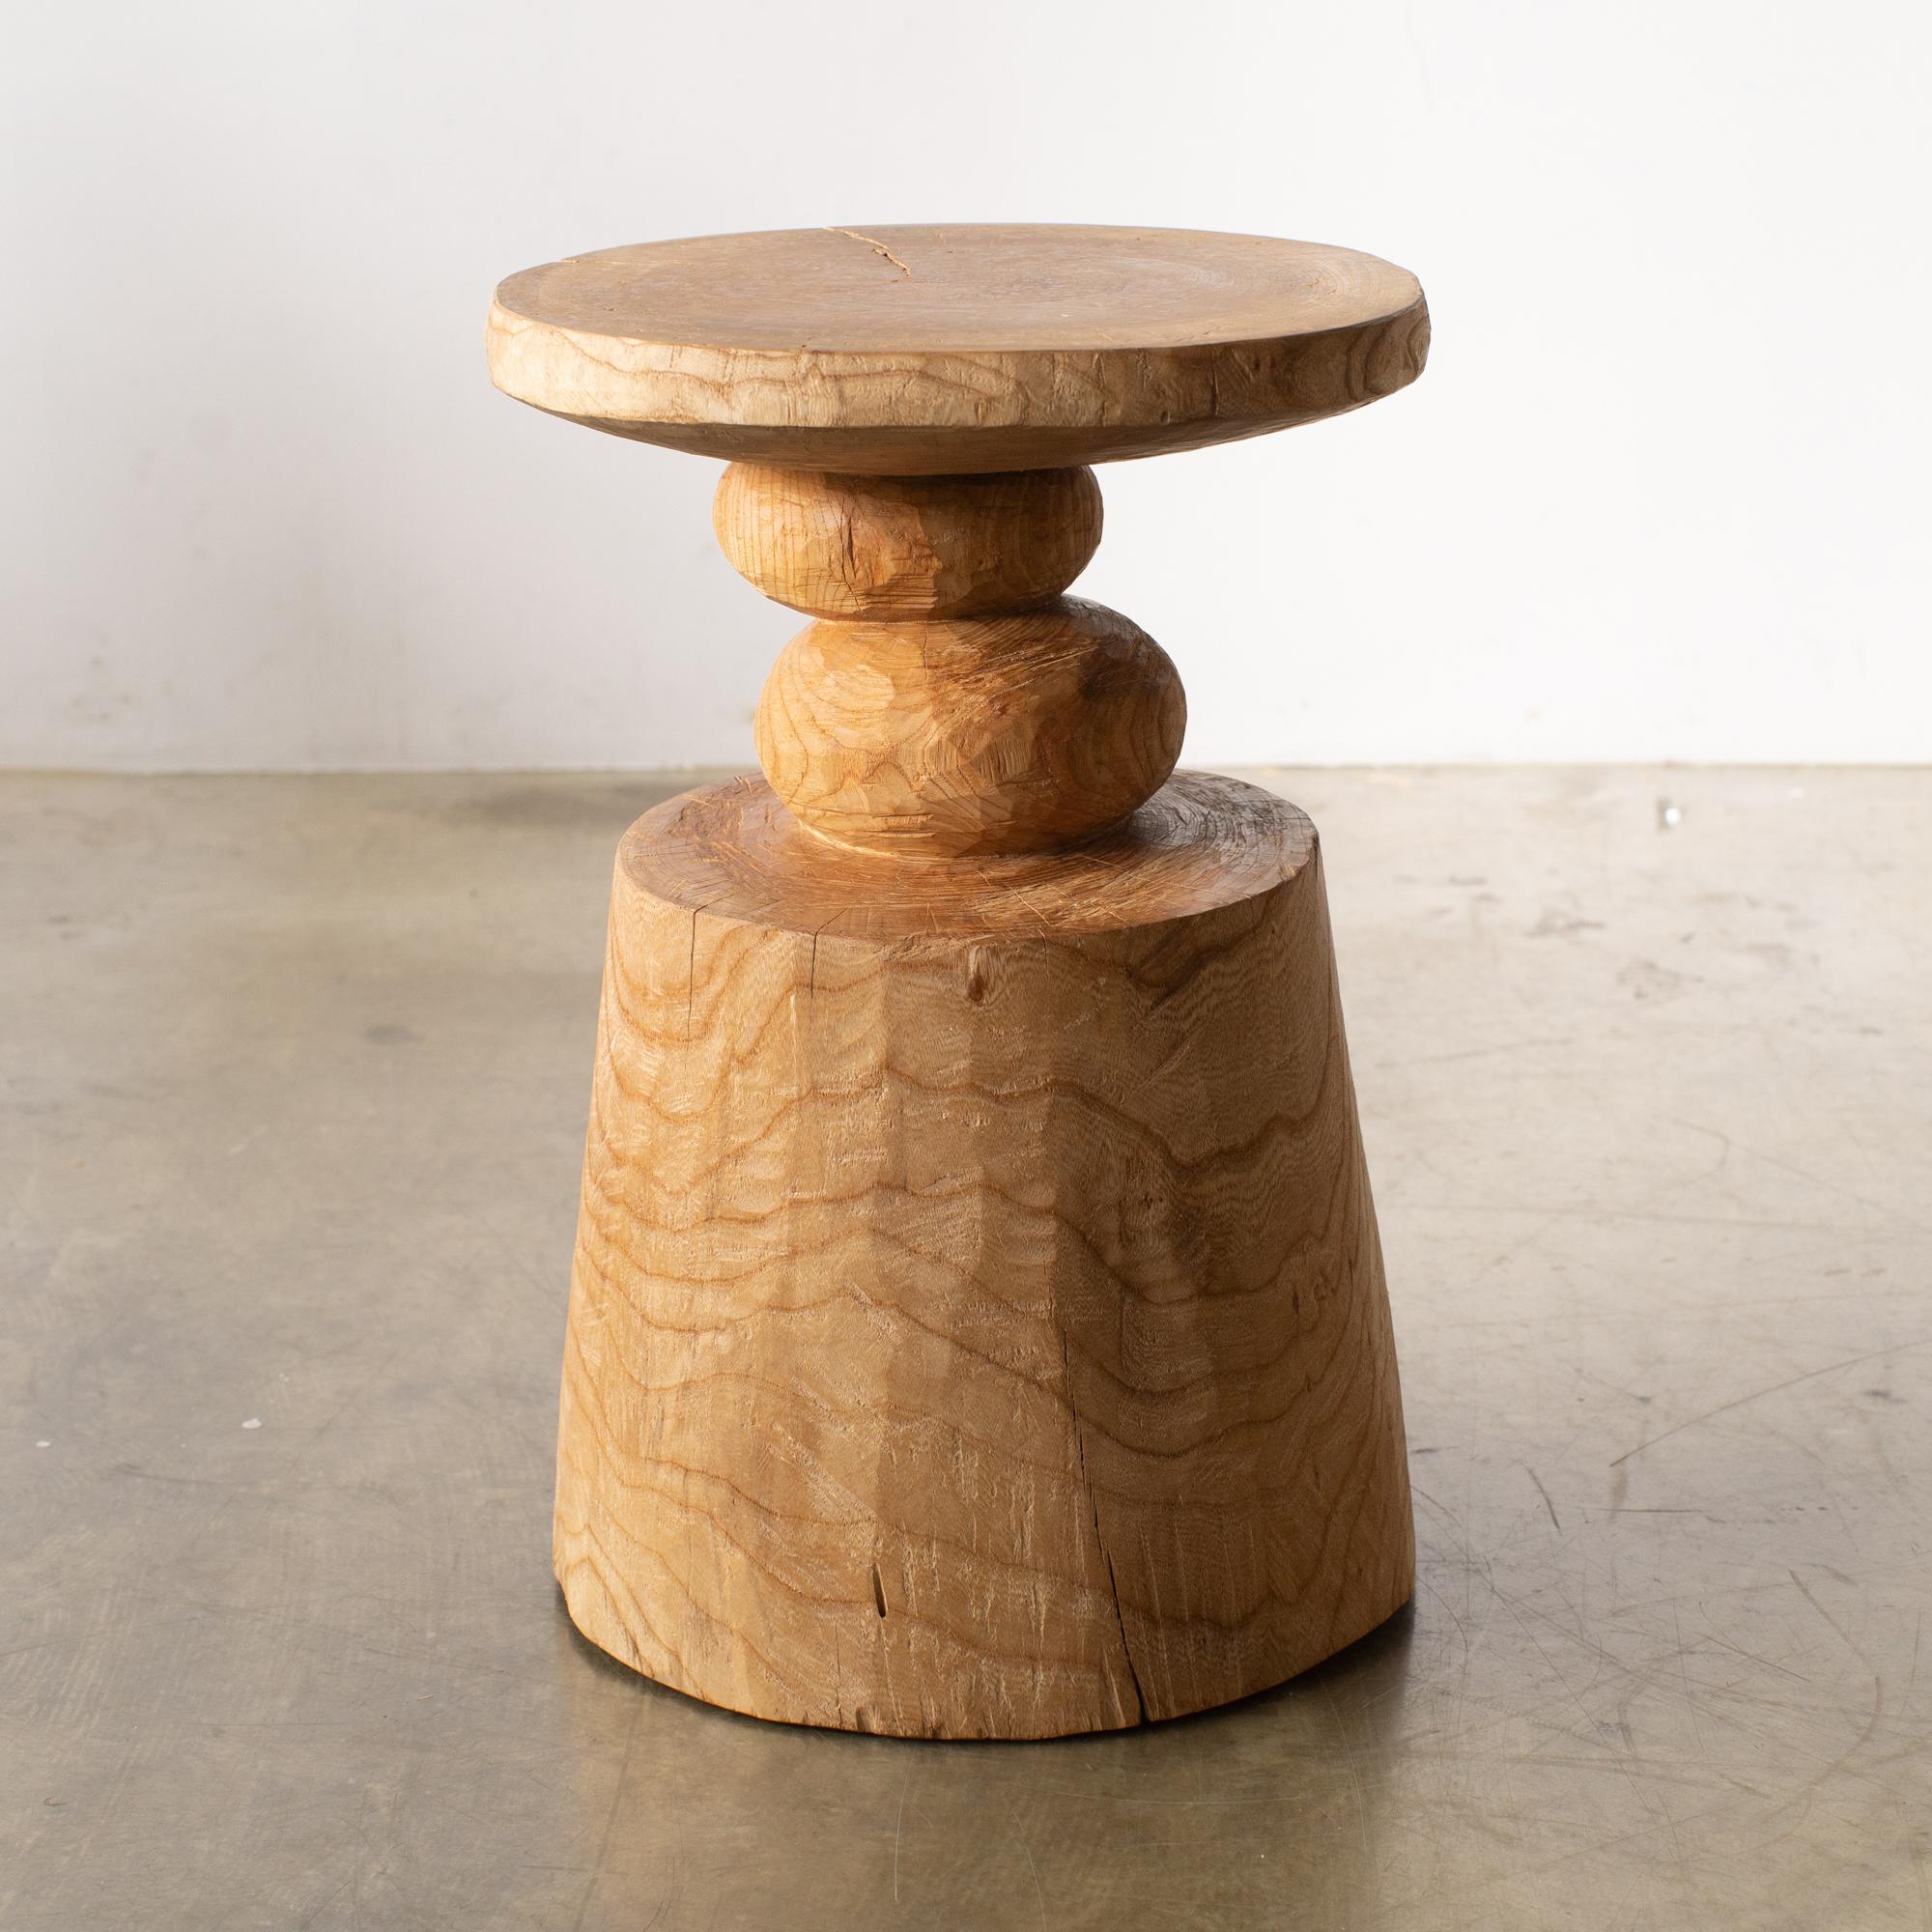 Name: Stone beach
Sculptural stool by Zougei carved furniture
Material: Zelkova
This work is carved from log with some kinds of chainsaws.
Most of wood used for Nishimura's works are unable to use anything, these woods are unsuitable material for